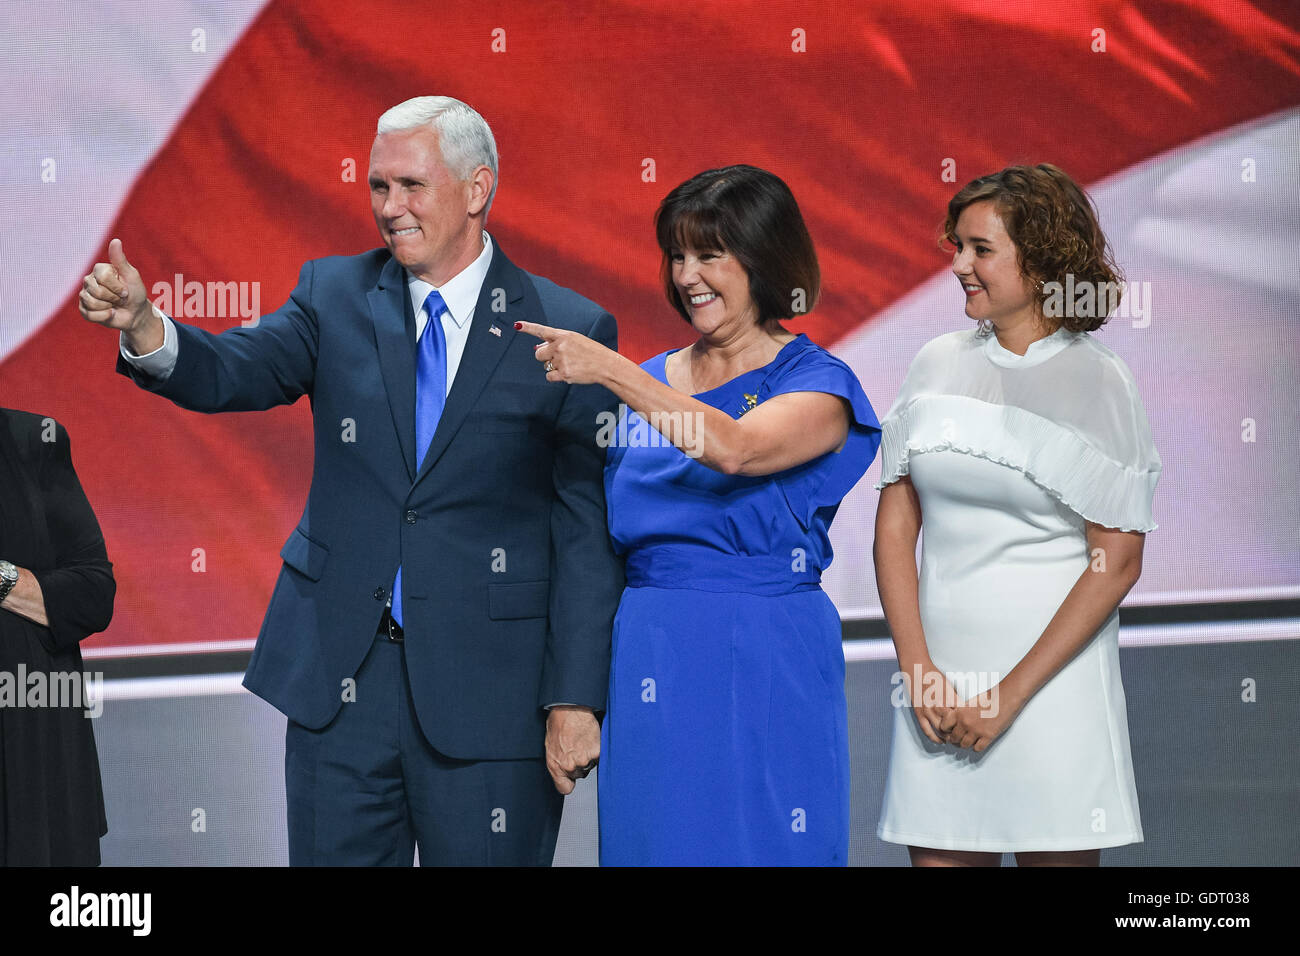 Cleveland, United States. 20th July, 2016. Gov. Mike Pence is joined onstage by his family after accepting the nomination as GOP Vice Presidential candidate during the third day of the Republican National Convention July 20, 2016 in Cleveland, Ohio. Credit:  Planetpix/Alamy Live News Stock Photo